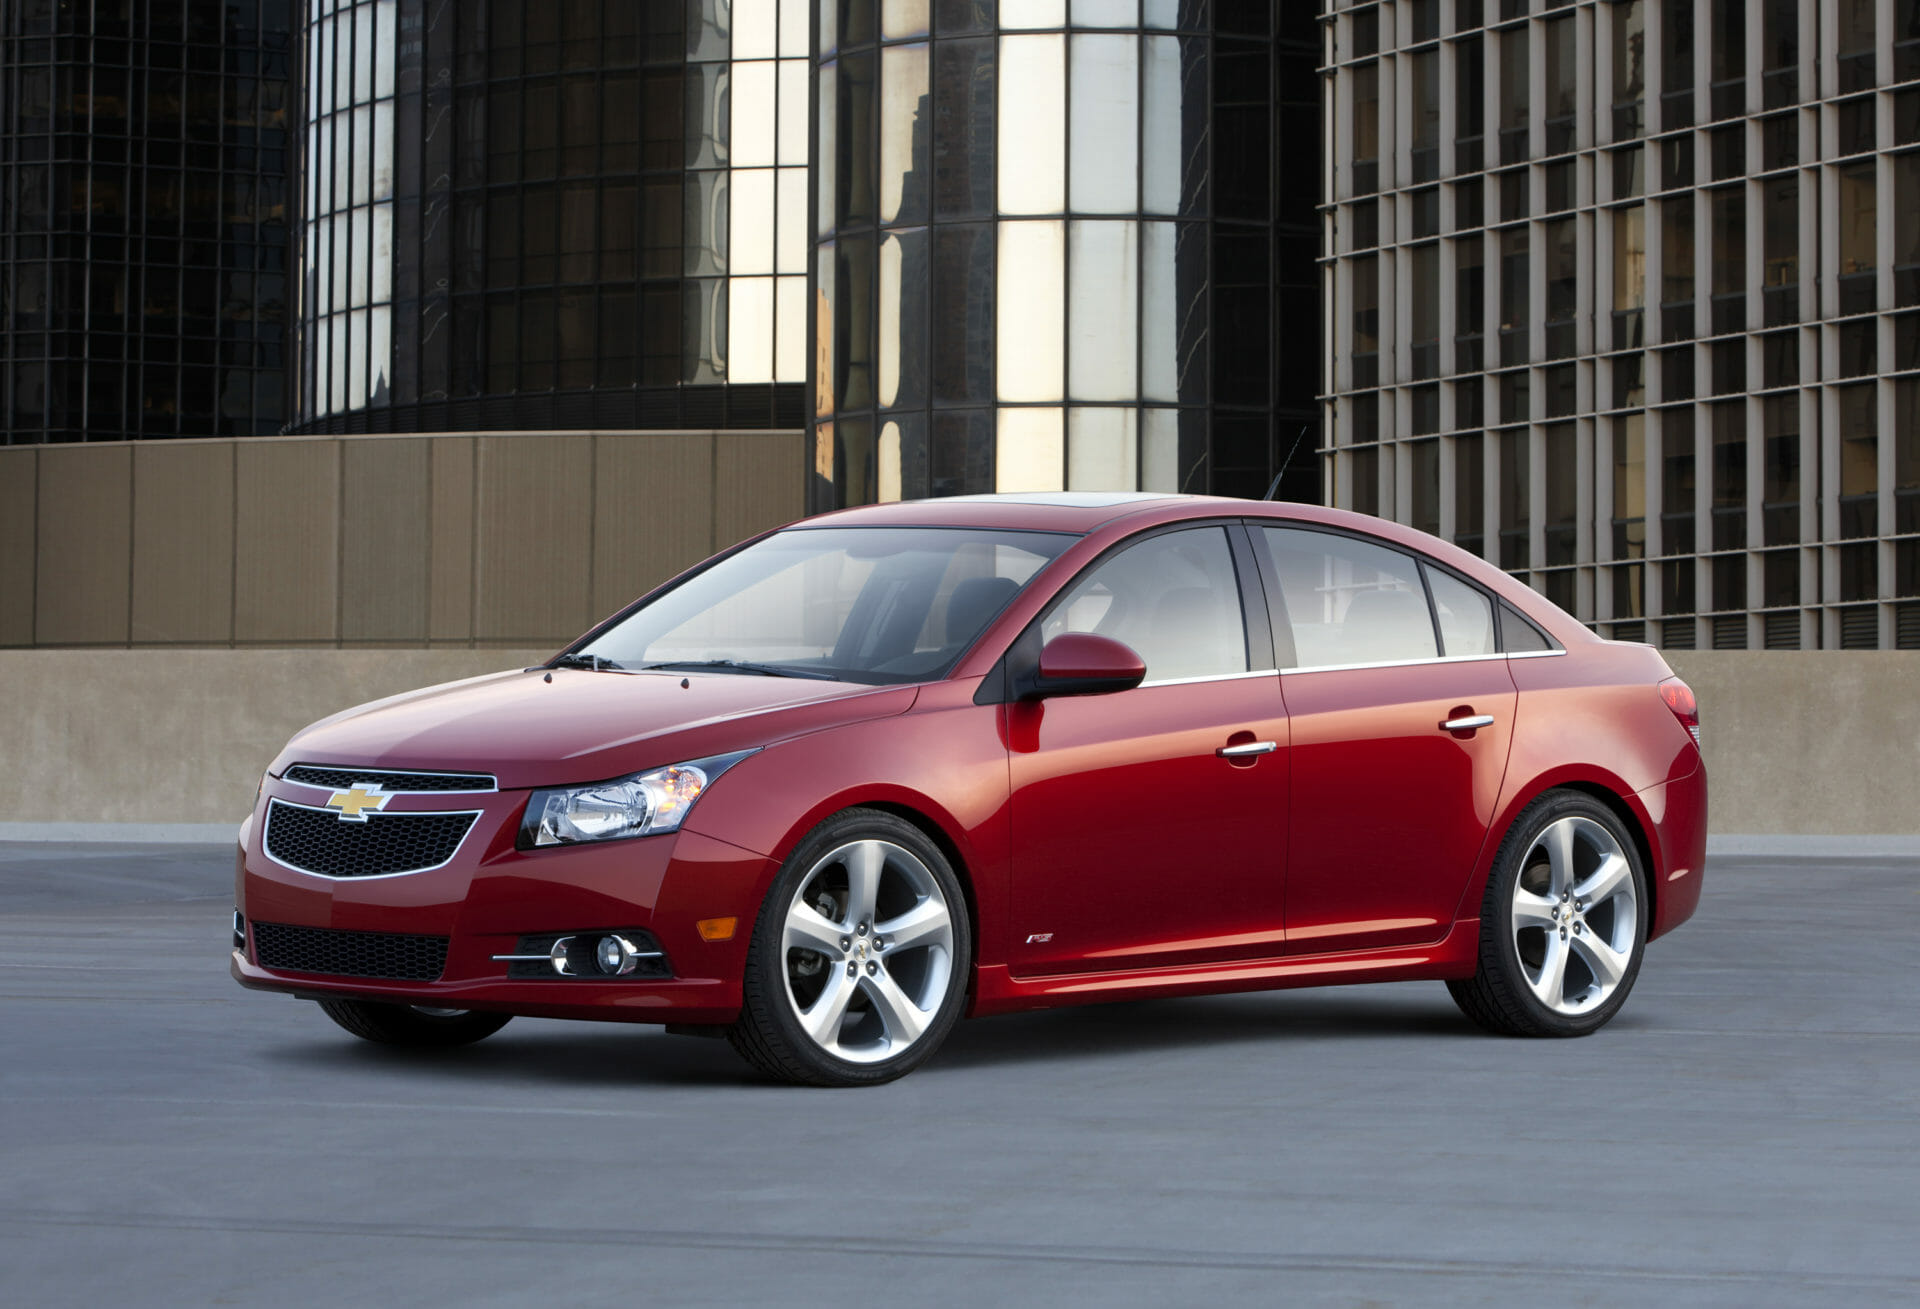 2011 Chevrolet Cruze Review: A Compact Car That Suffers From Serious Breakdowns